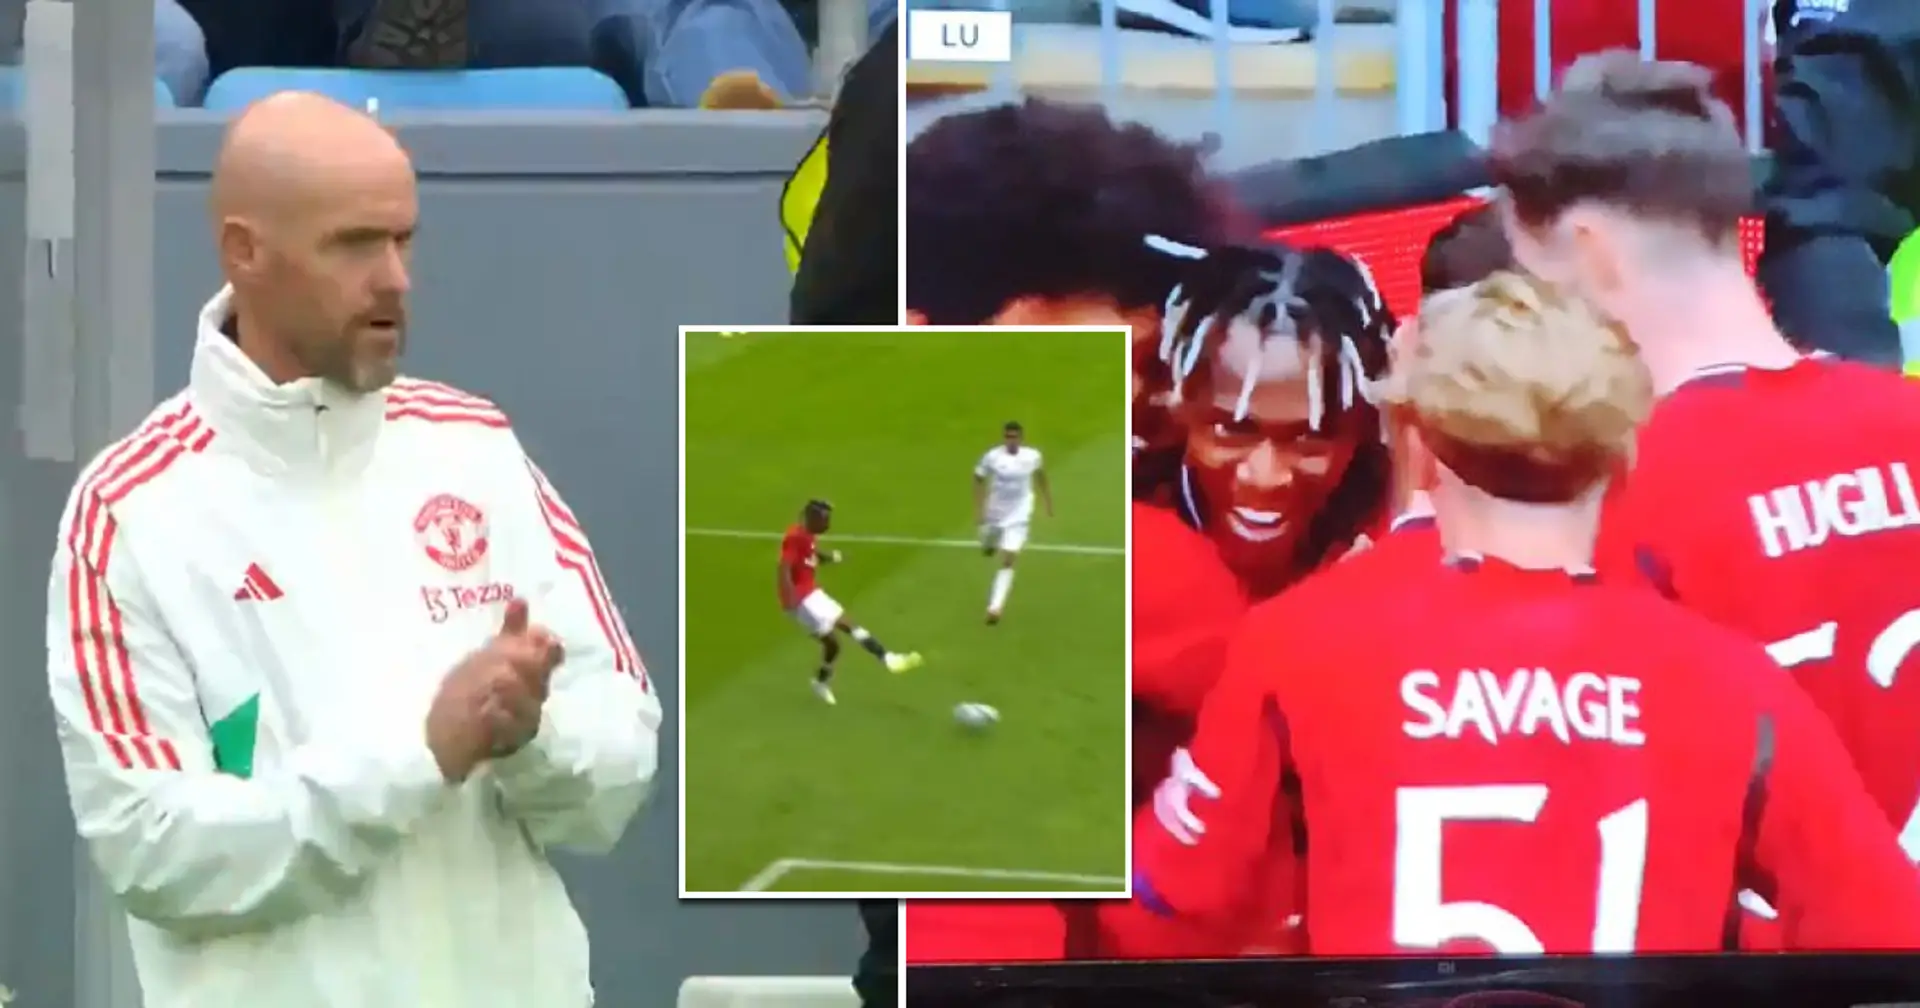 Spotted: How Ten Hag reacted to Man United's first goal this season